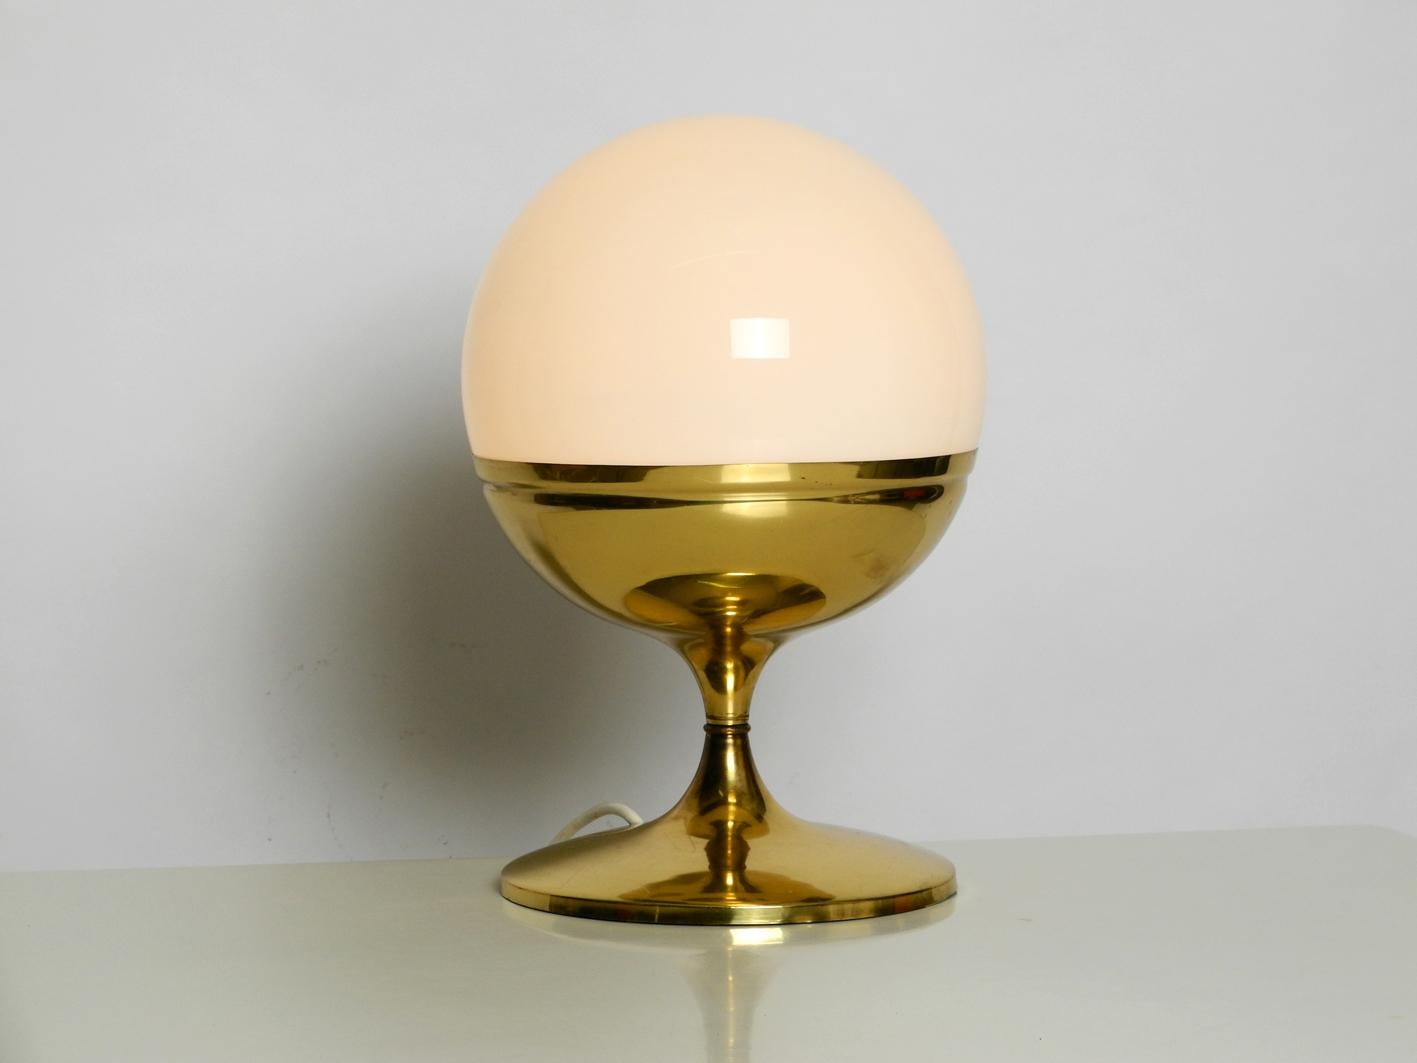 1960s extra large brass tulip table lamp with one glass ball. Great Space Age pop art design with a high quality heavy brass foot. White opal glass shade for glare-free light. Very nice condition without damages with nice patina.
Fully functional